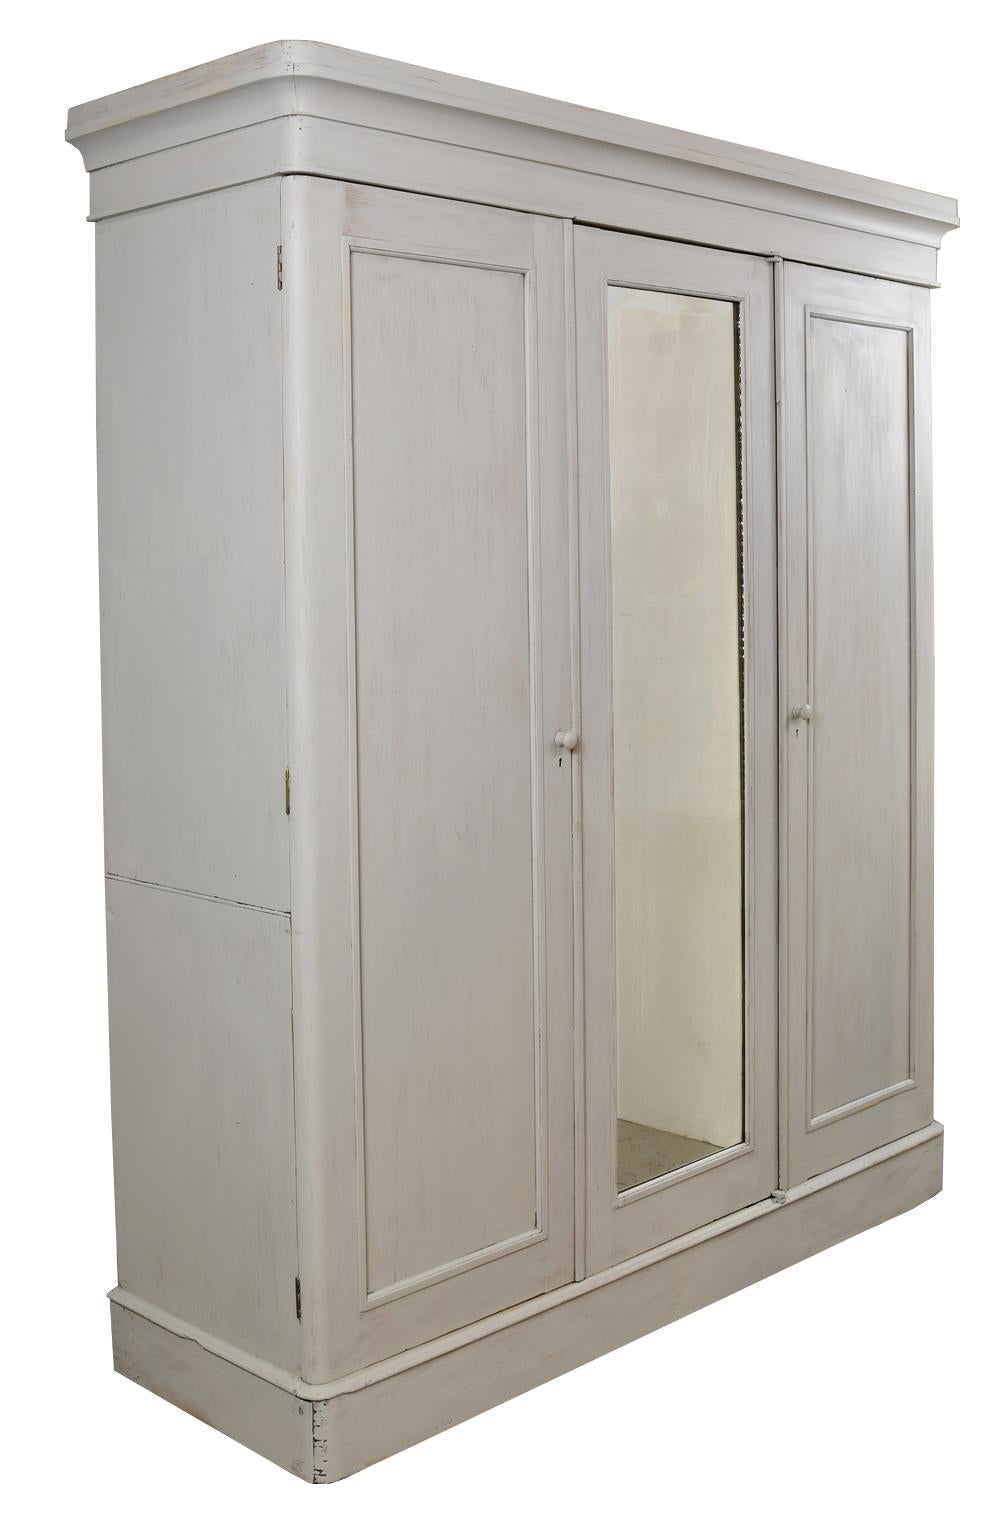 English Edwardian Pine Wardrobe in Painted Limed Finish with Interior Drawers 2